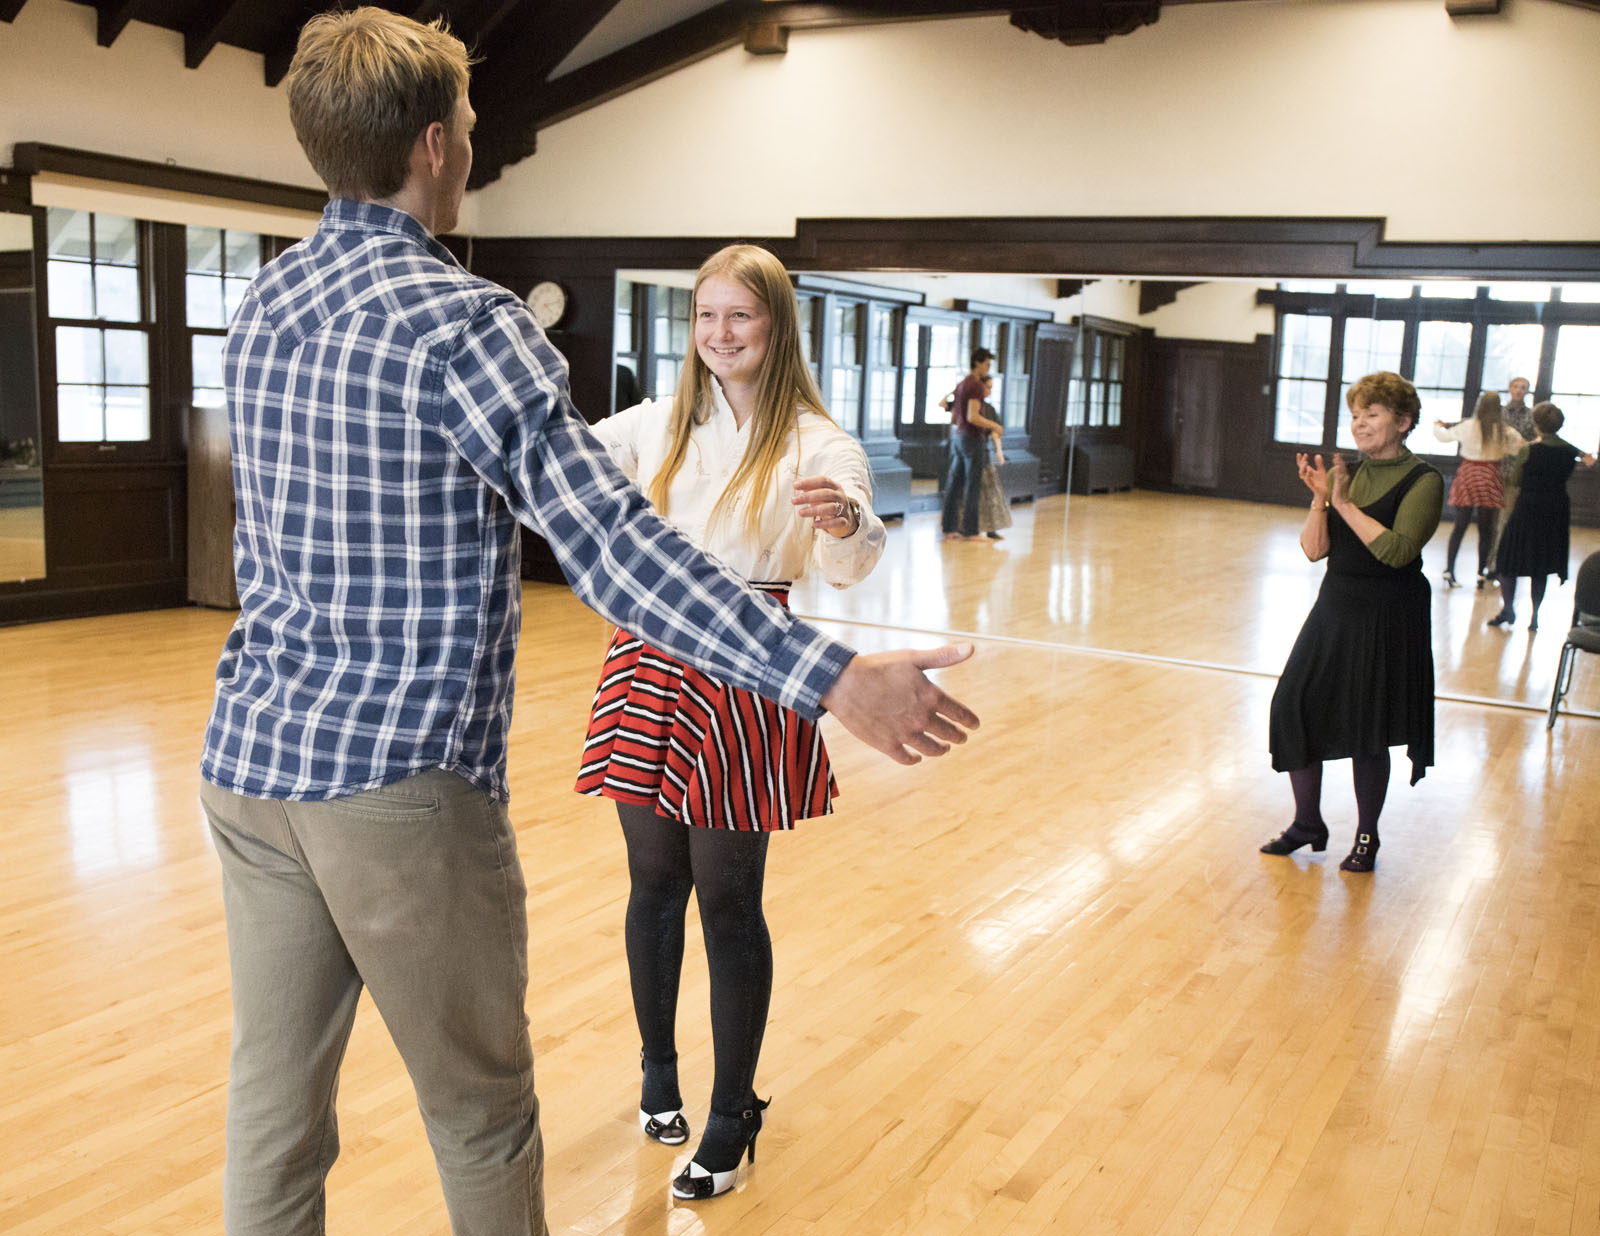 Marcia Dobson applauds Joel Frykholm '20 and Haley Colgate '20 as they finish a dance during a ballroom dancing class.